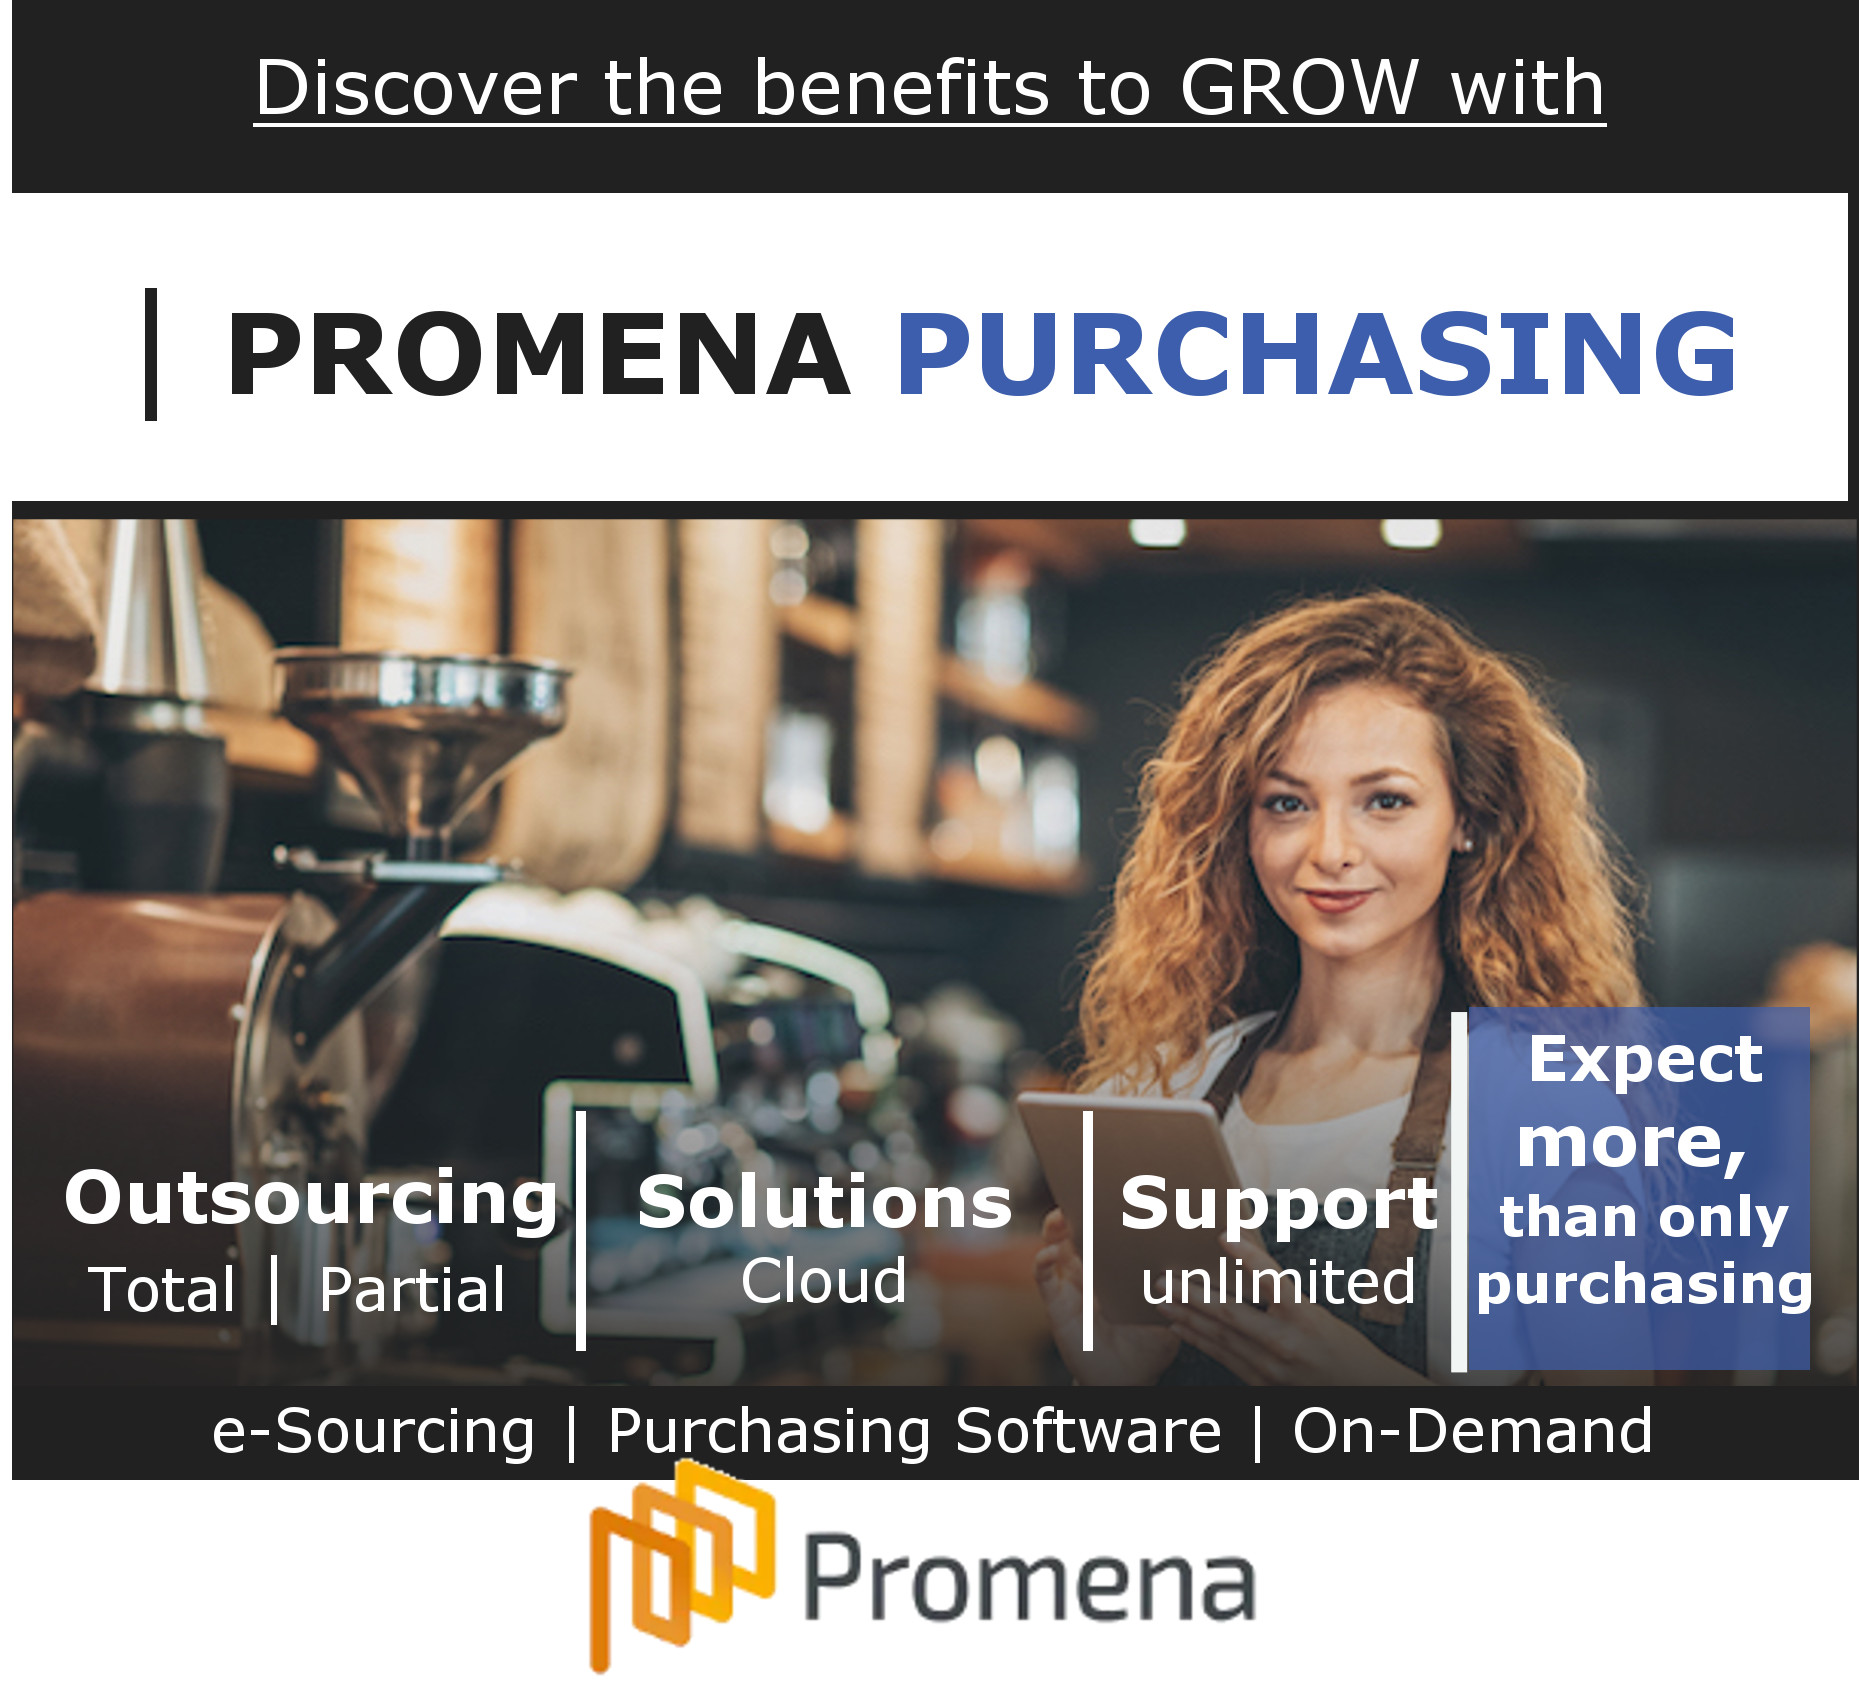 Promena Purchasing Software and services